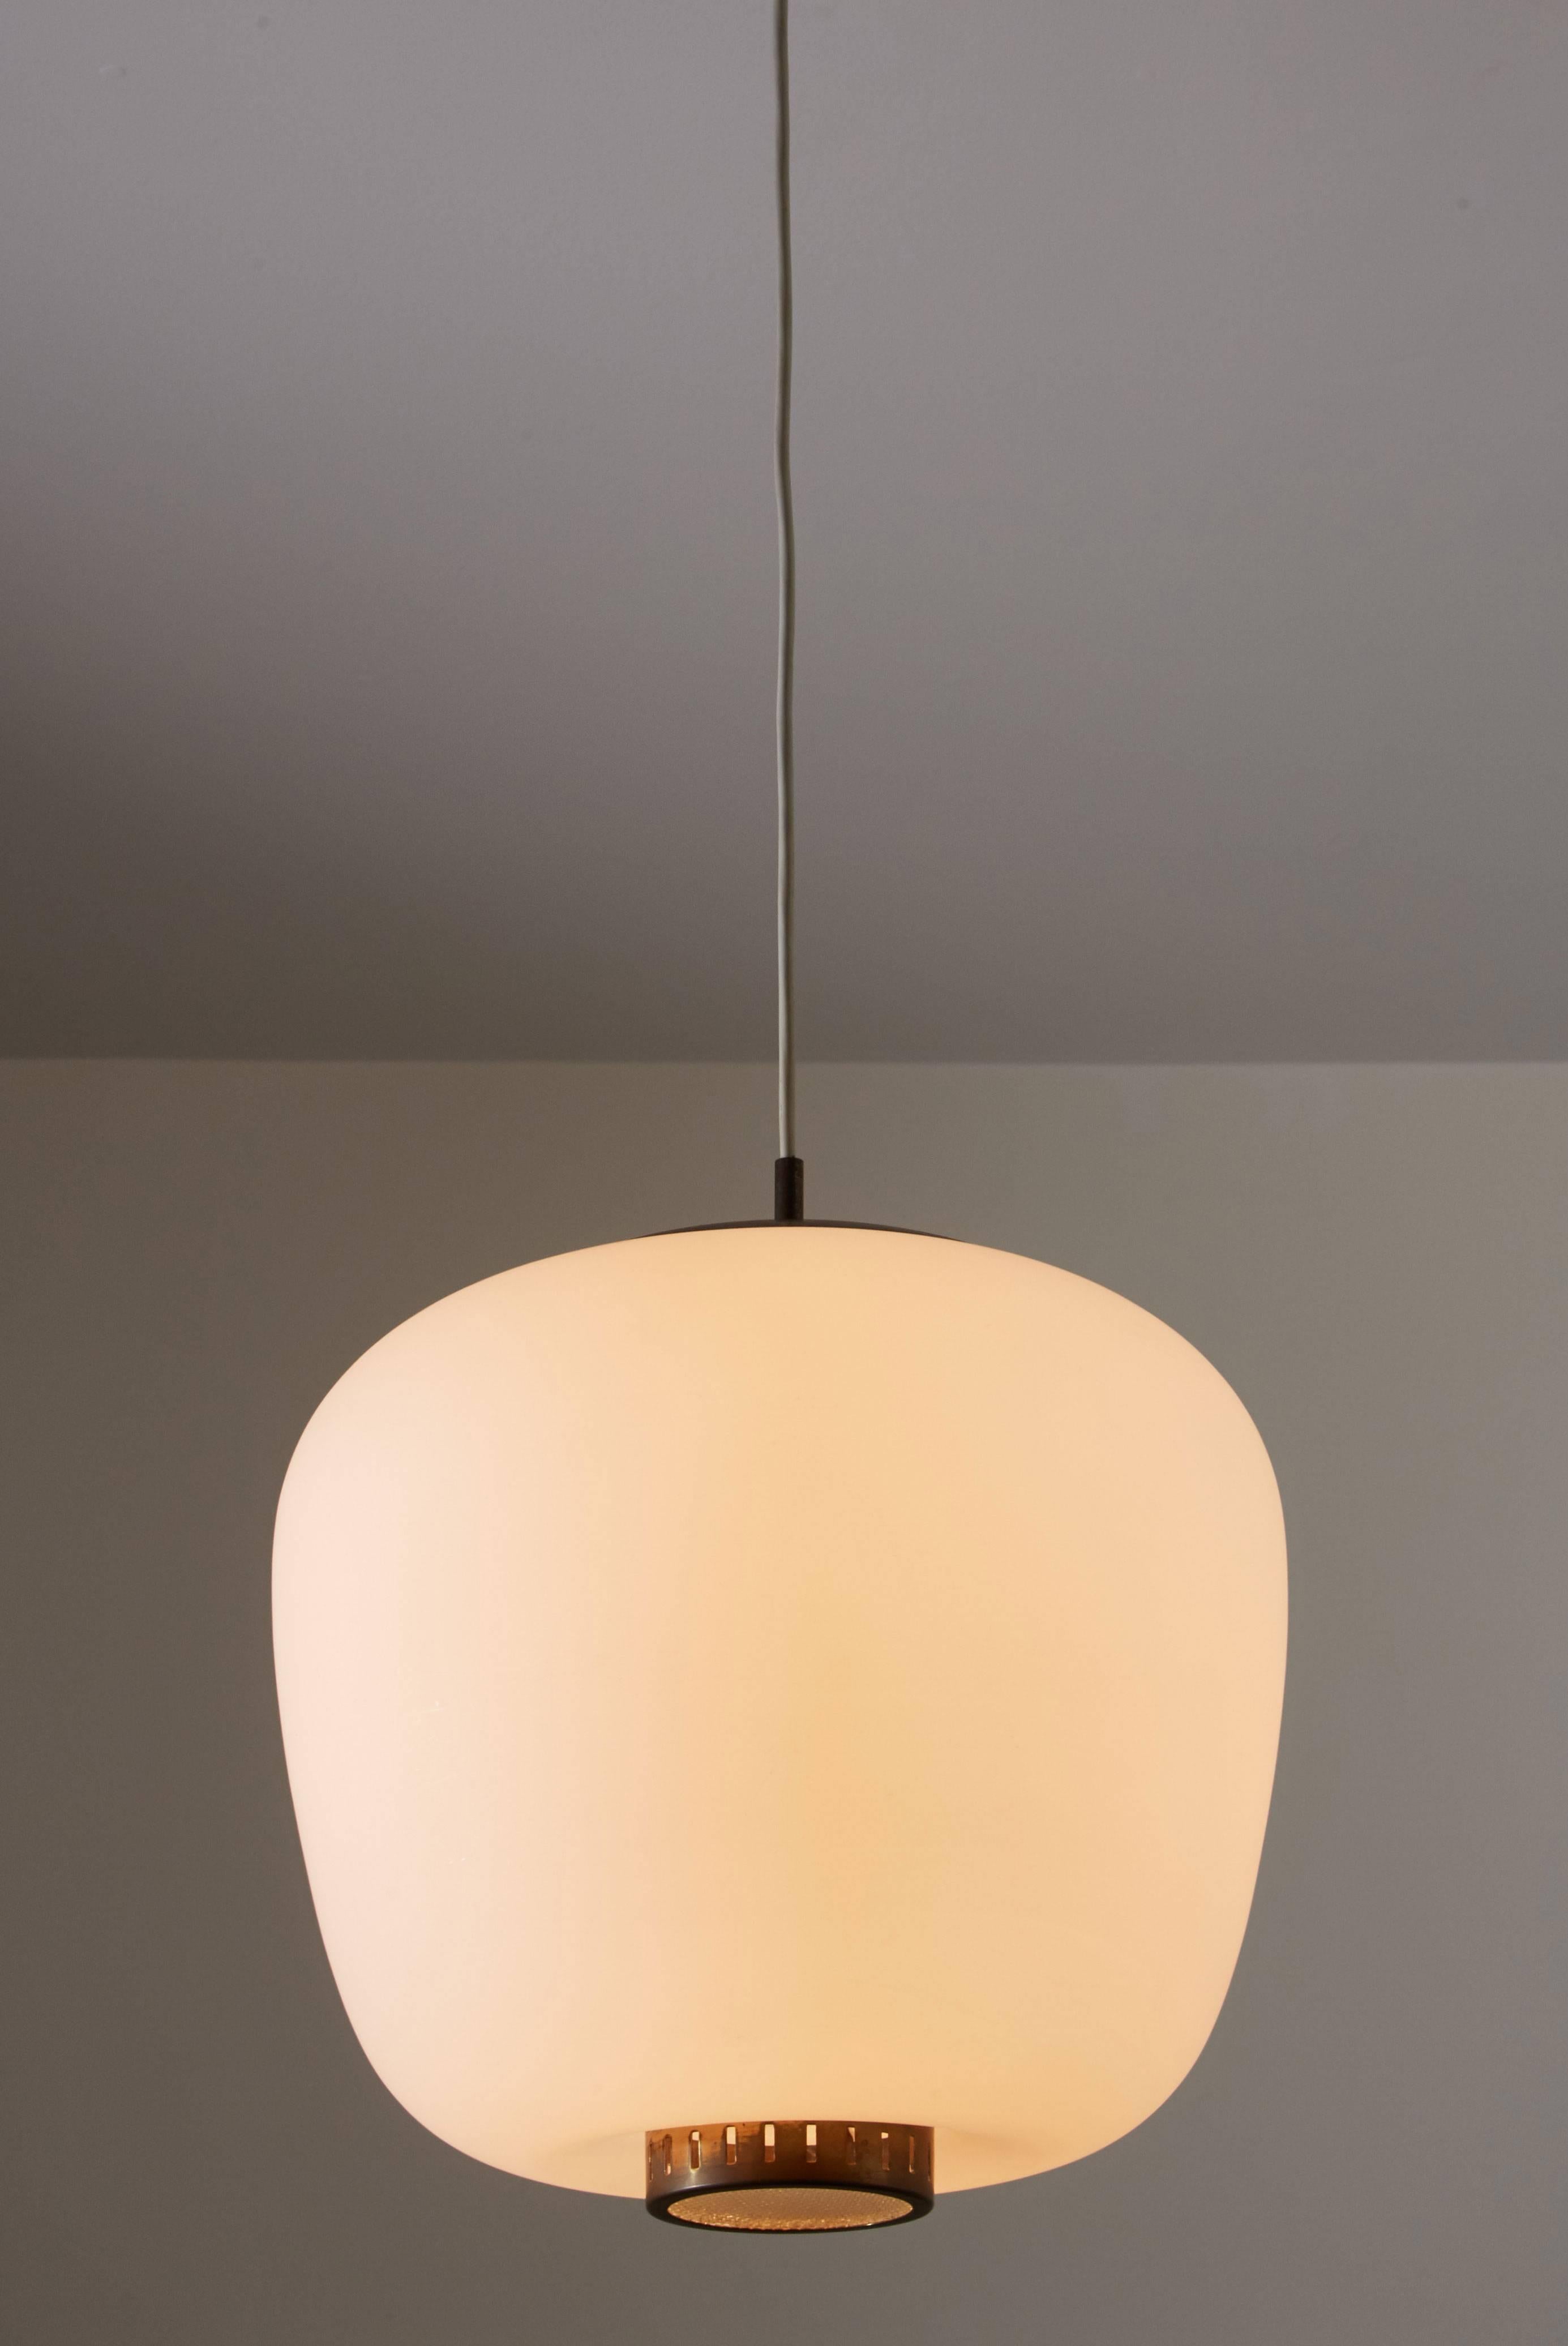 Brass and satin glass pendant by Stilnovo. Designed in Italy, circa 1950s. Original canopy with custom brass backplate. Overall drop can be adjusted. Height displayed is for fixture only. Rewired for US junction boxes. Takes one E27 100w maximum